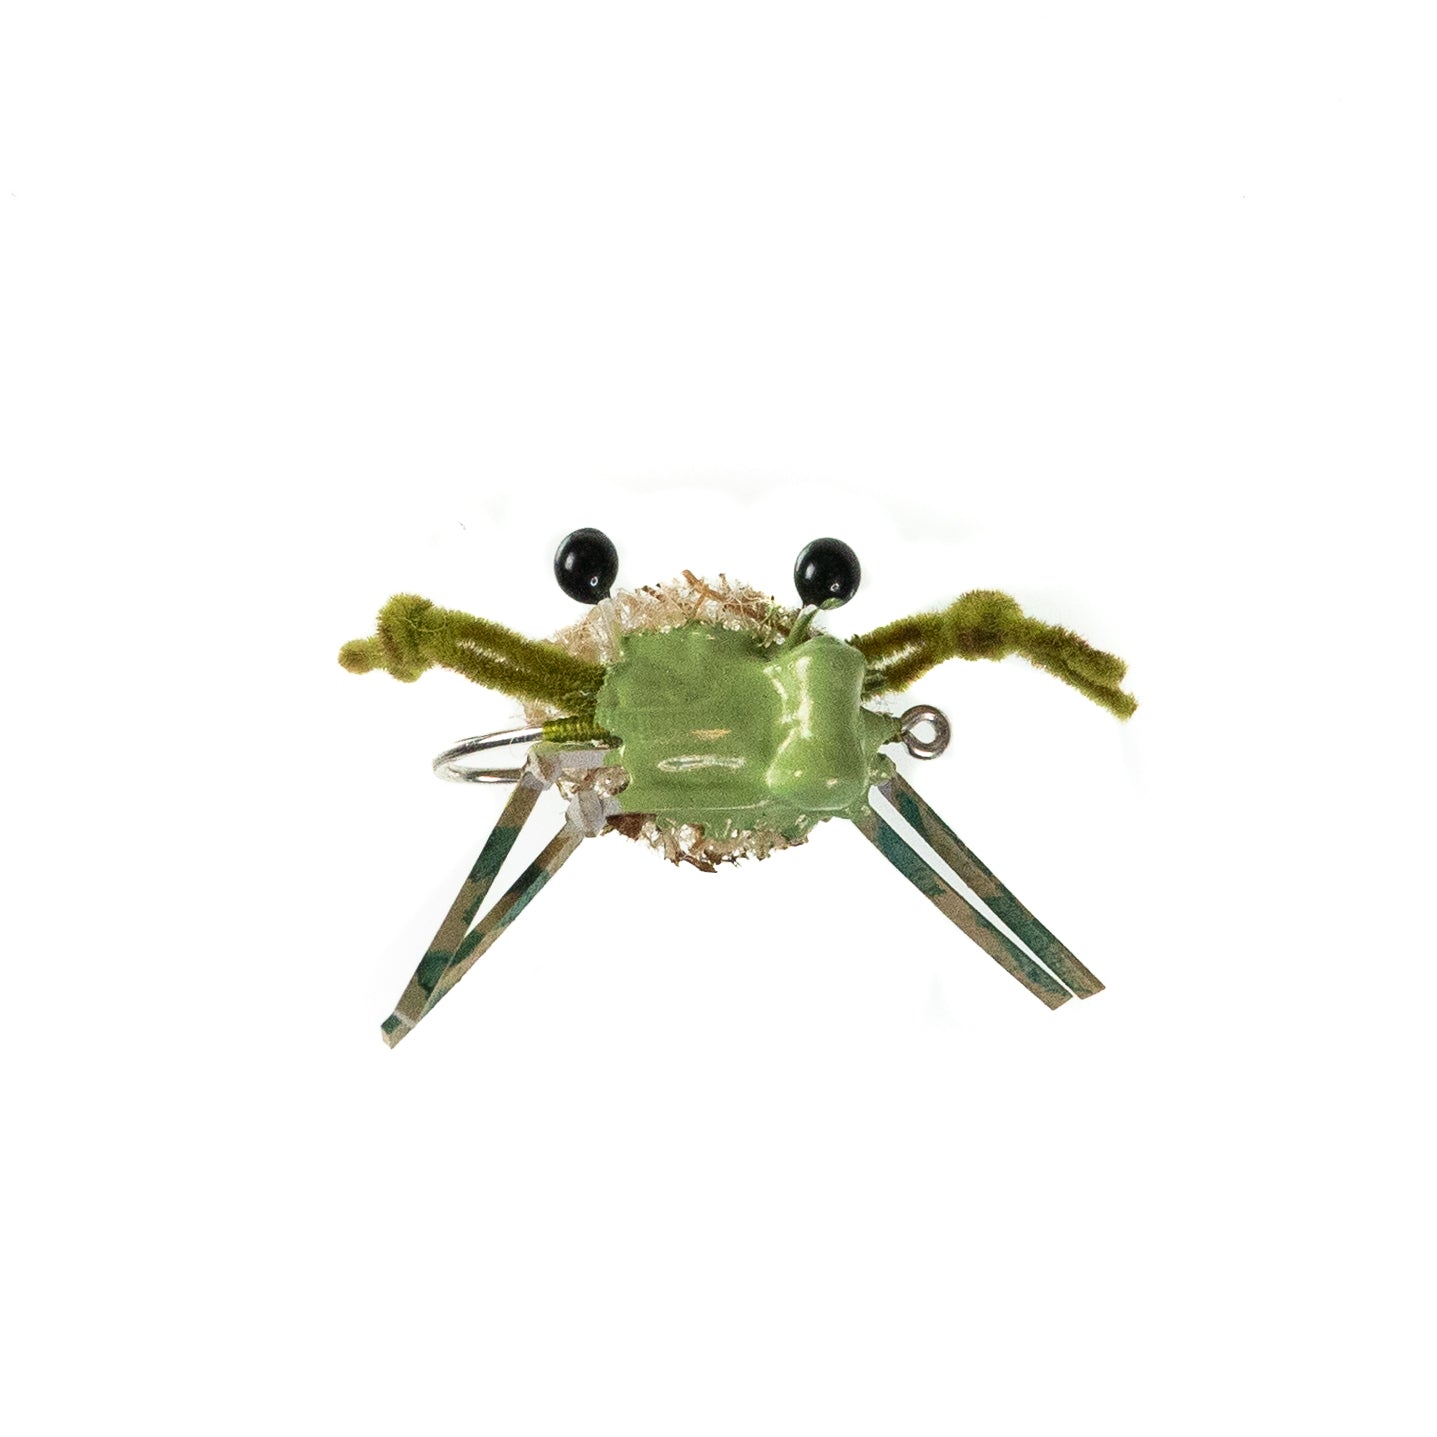 The Contraband Crab